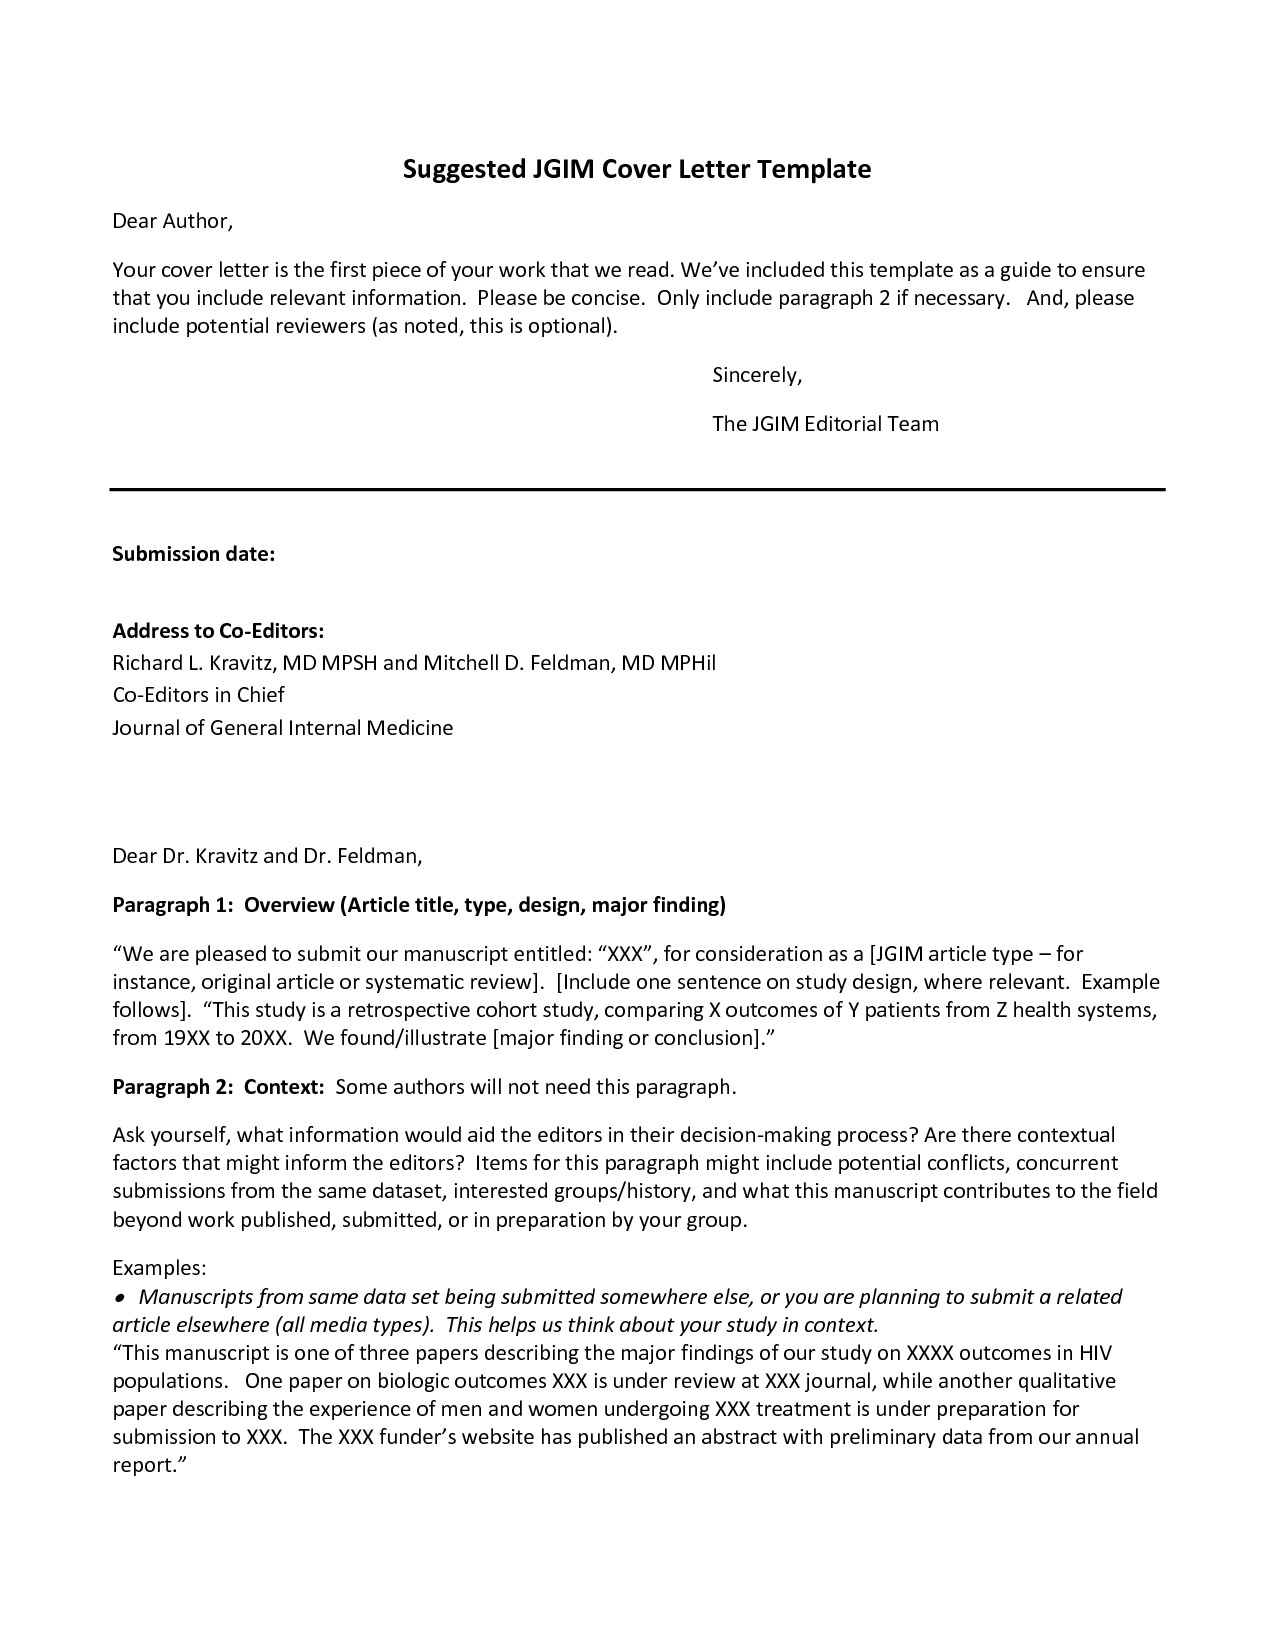 sample cover letter to editor scientific journal